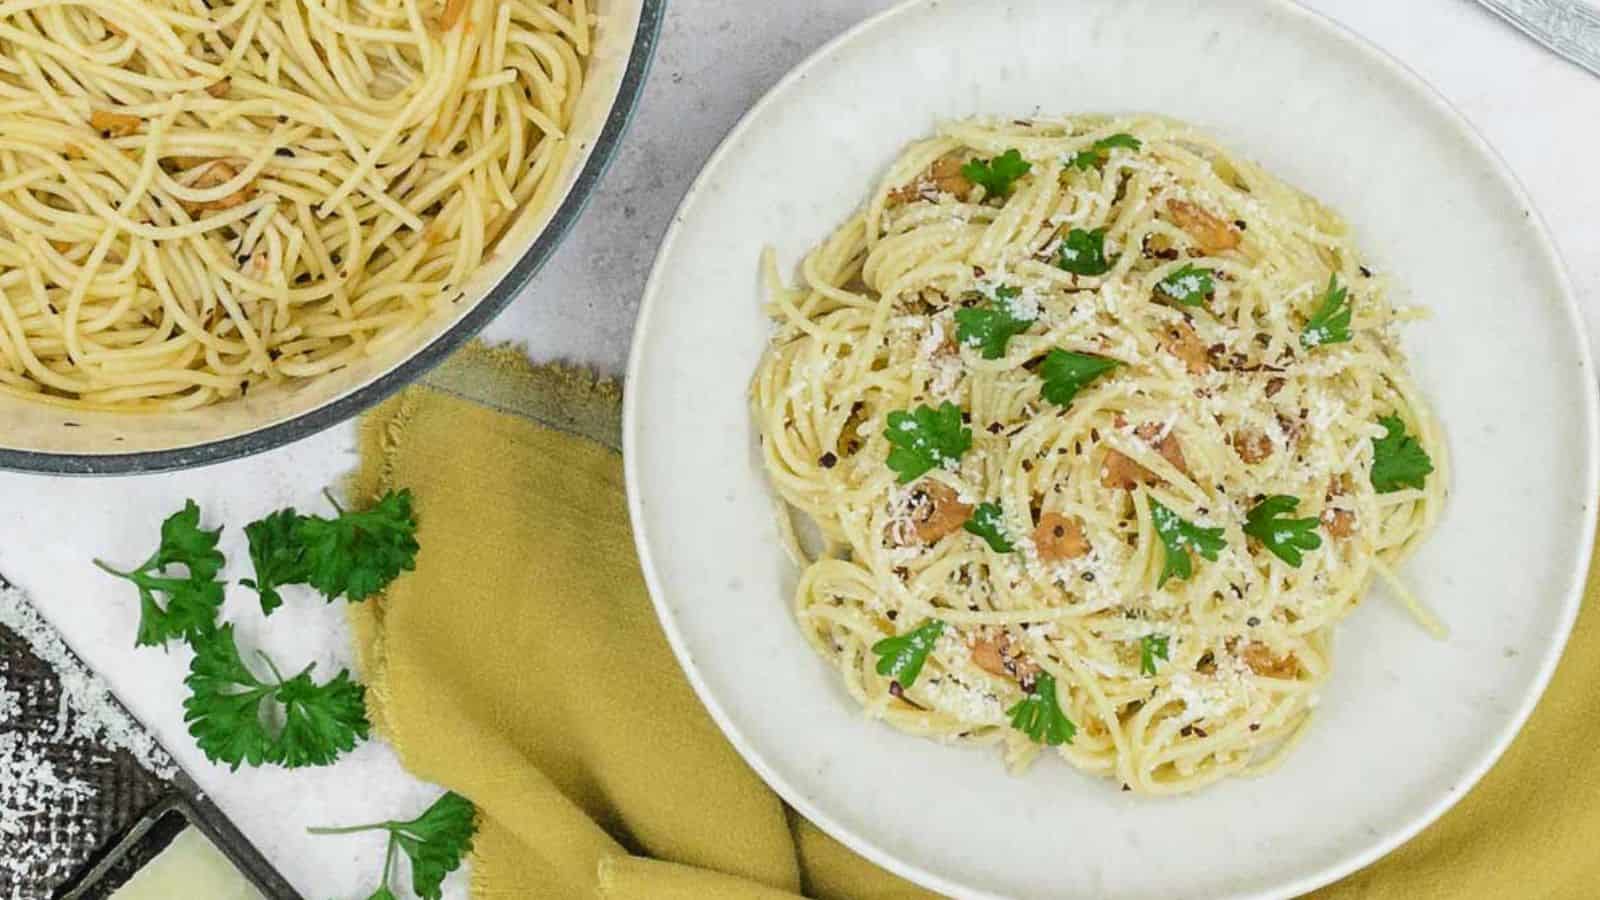 A delicious and simple pasta recipe topped with parmesan cheese and parsley.